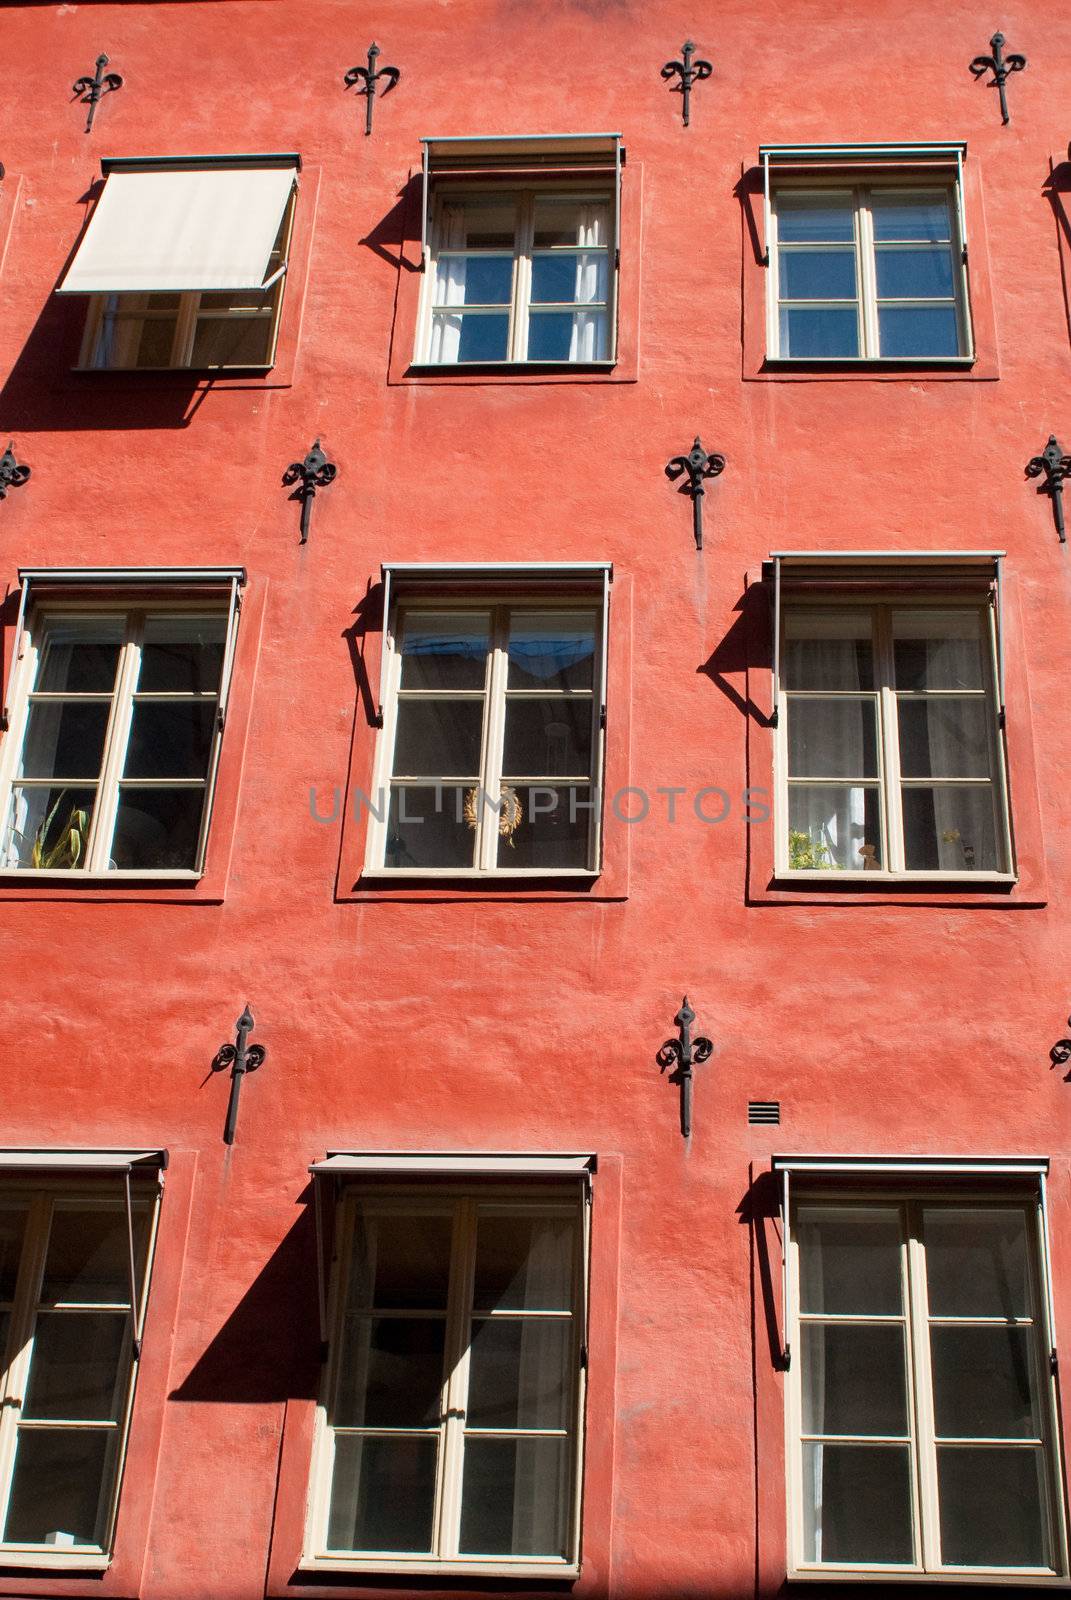 a red painted ancient house with an ornamented facade